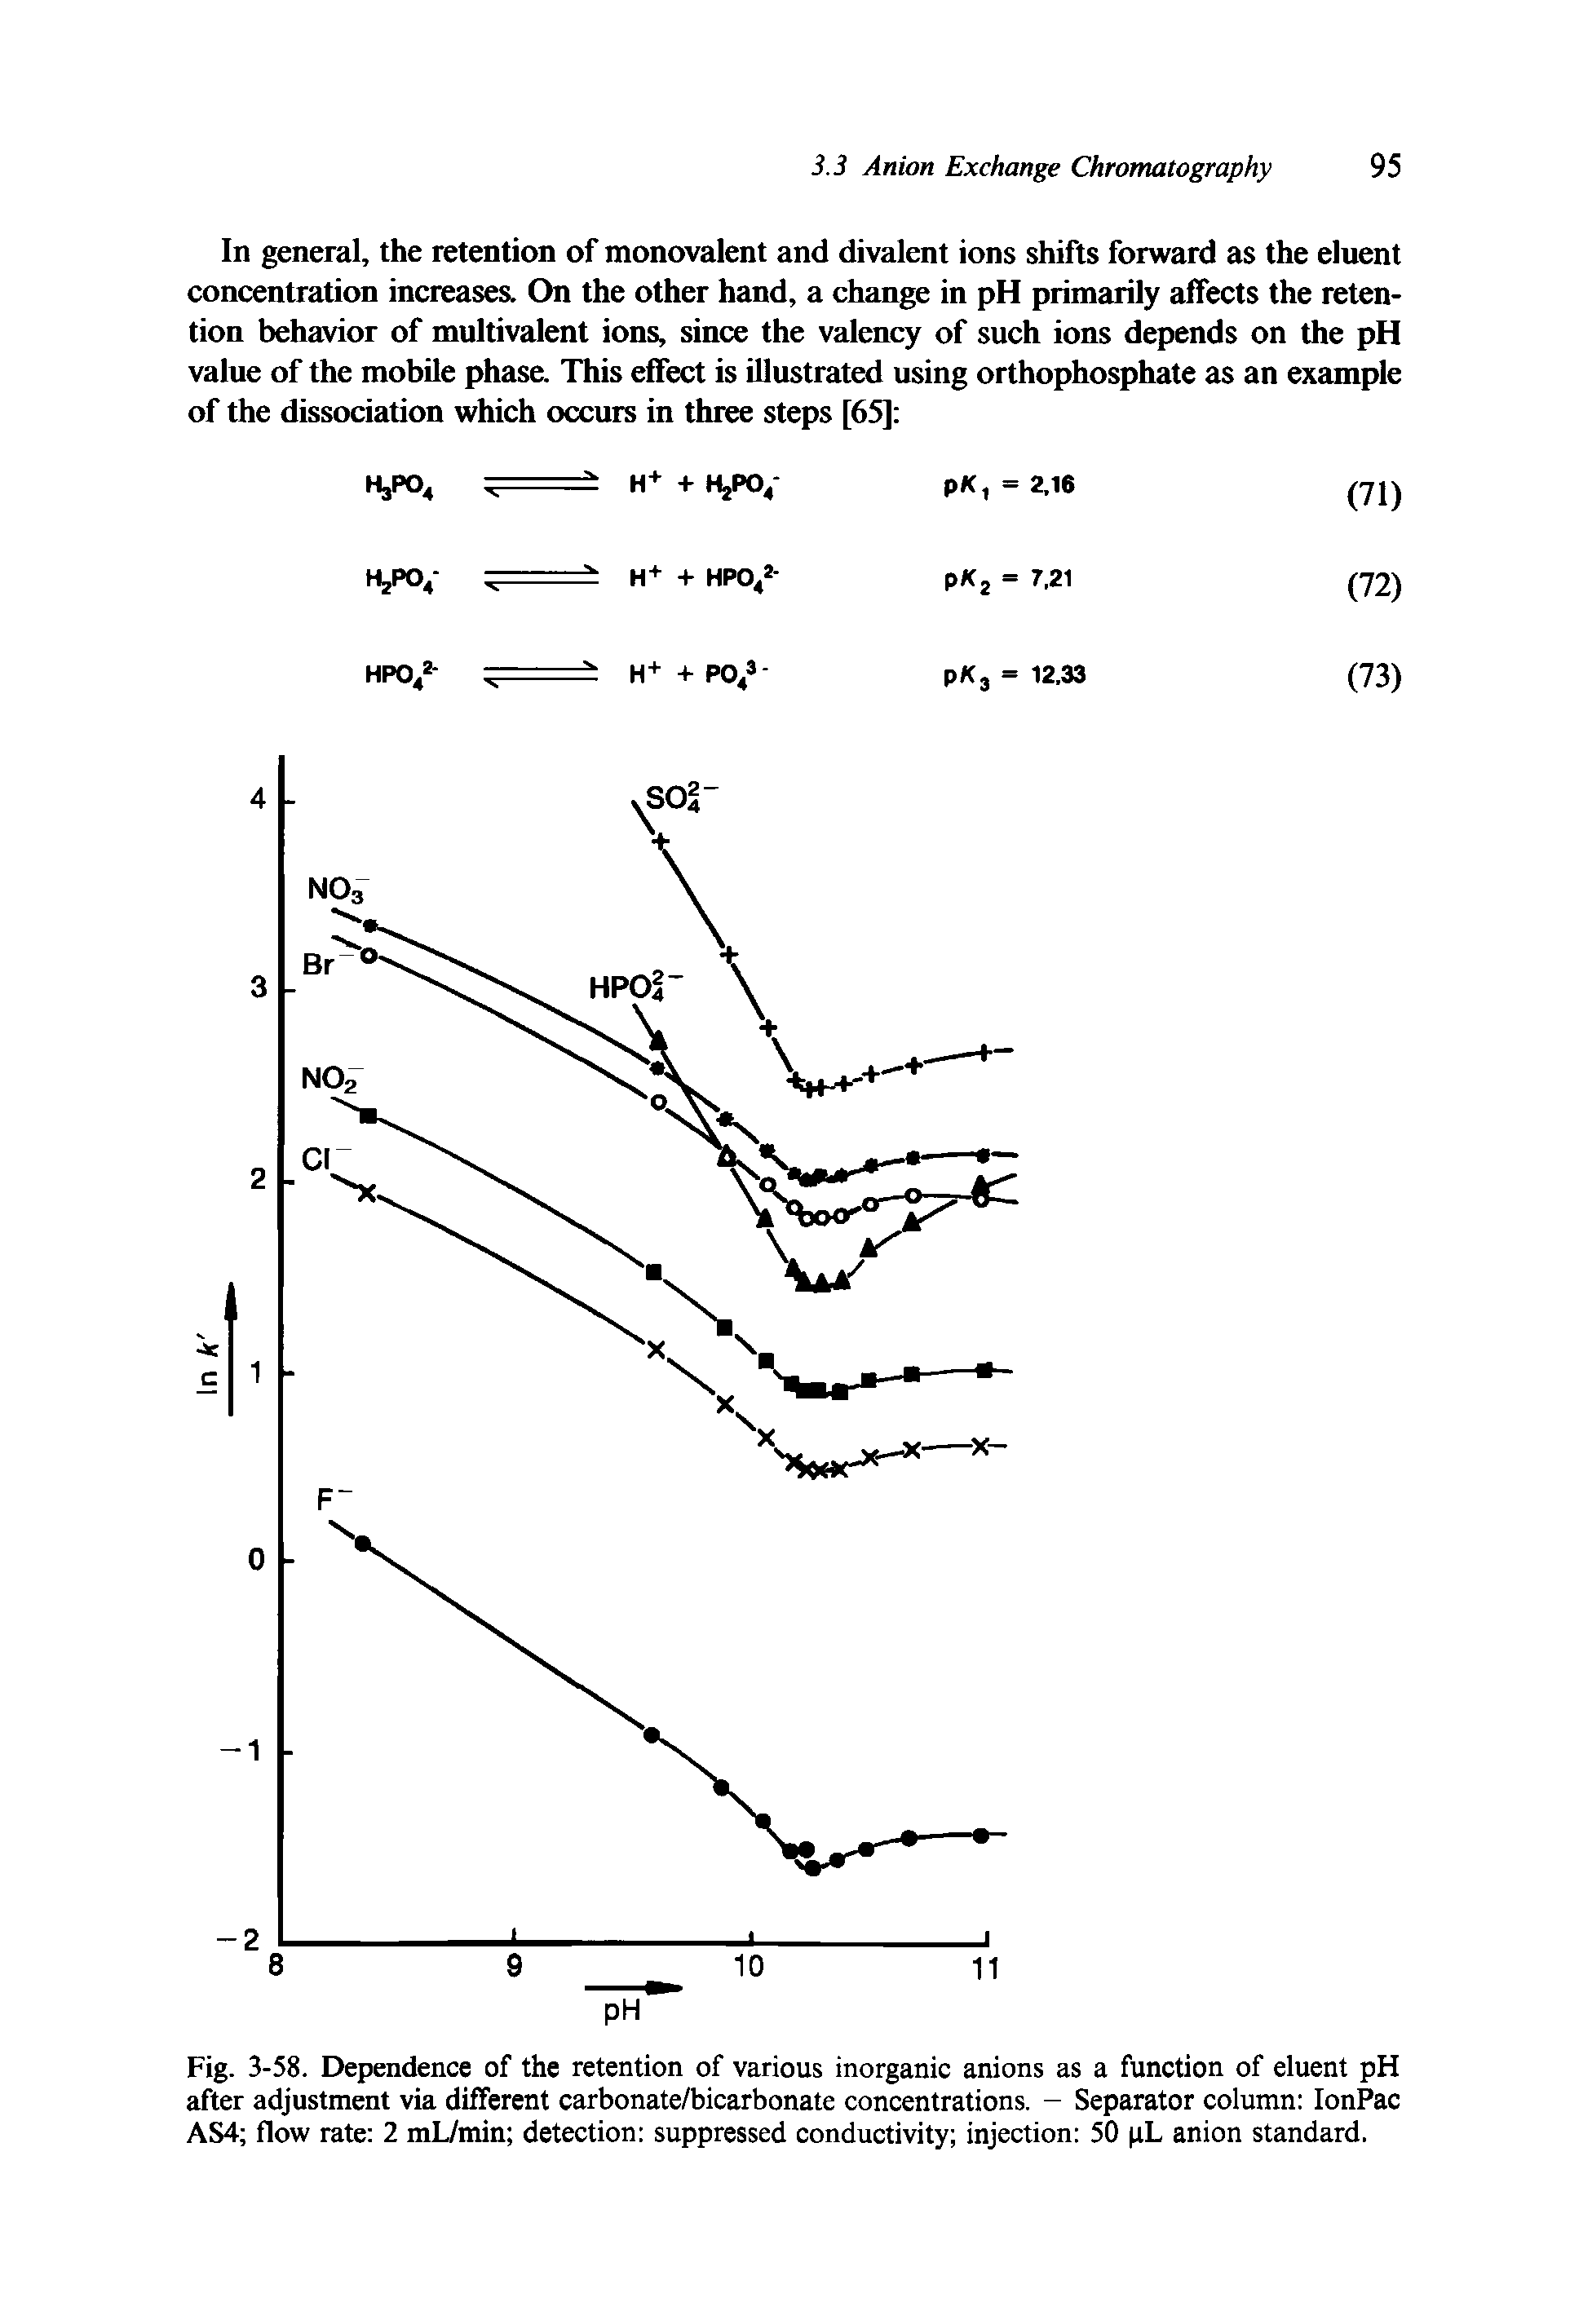 Fig. 3-58. Dependence of the retention of various inorganic anions as a function of eluent pH after adjustment via different carbonate/bicarbonate concentrations. - Separator column IonPac AS4 flow rate 2 mL/min detection suppressed conductivity injection 50 pL anion standard.